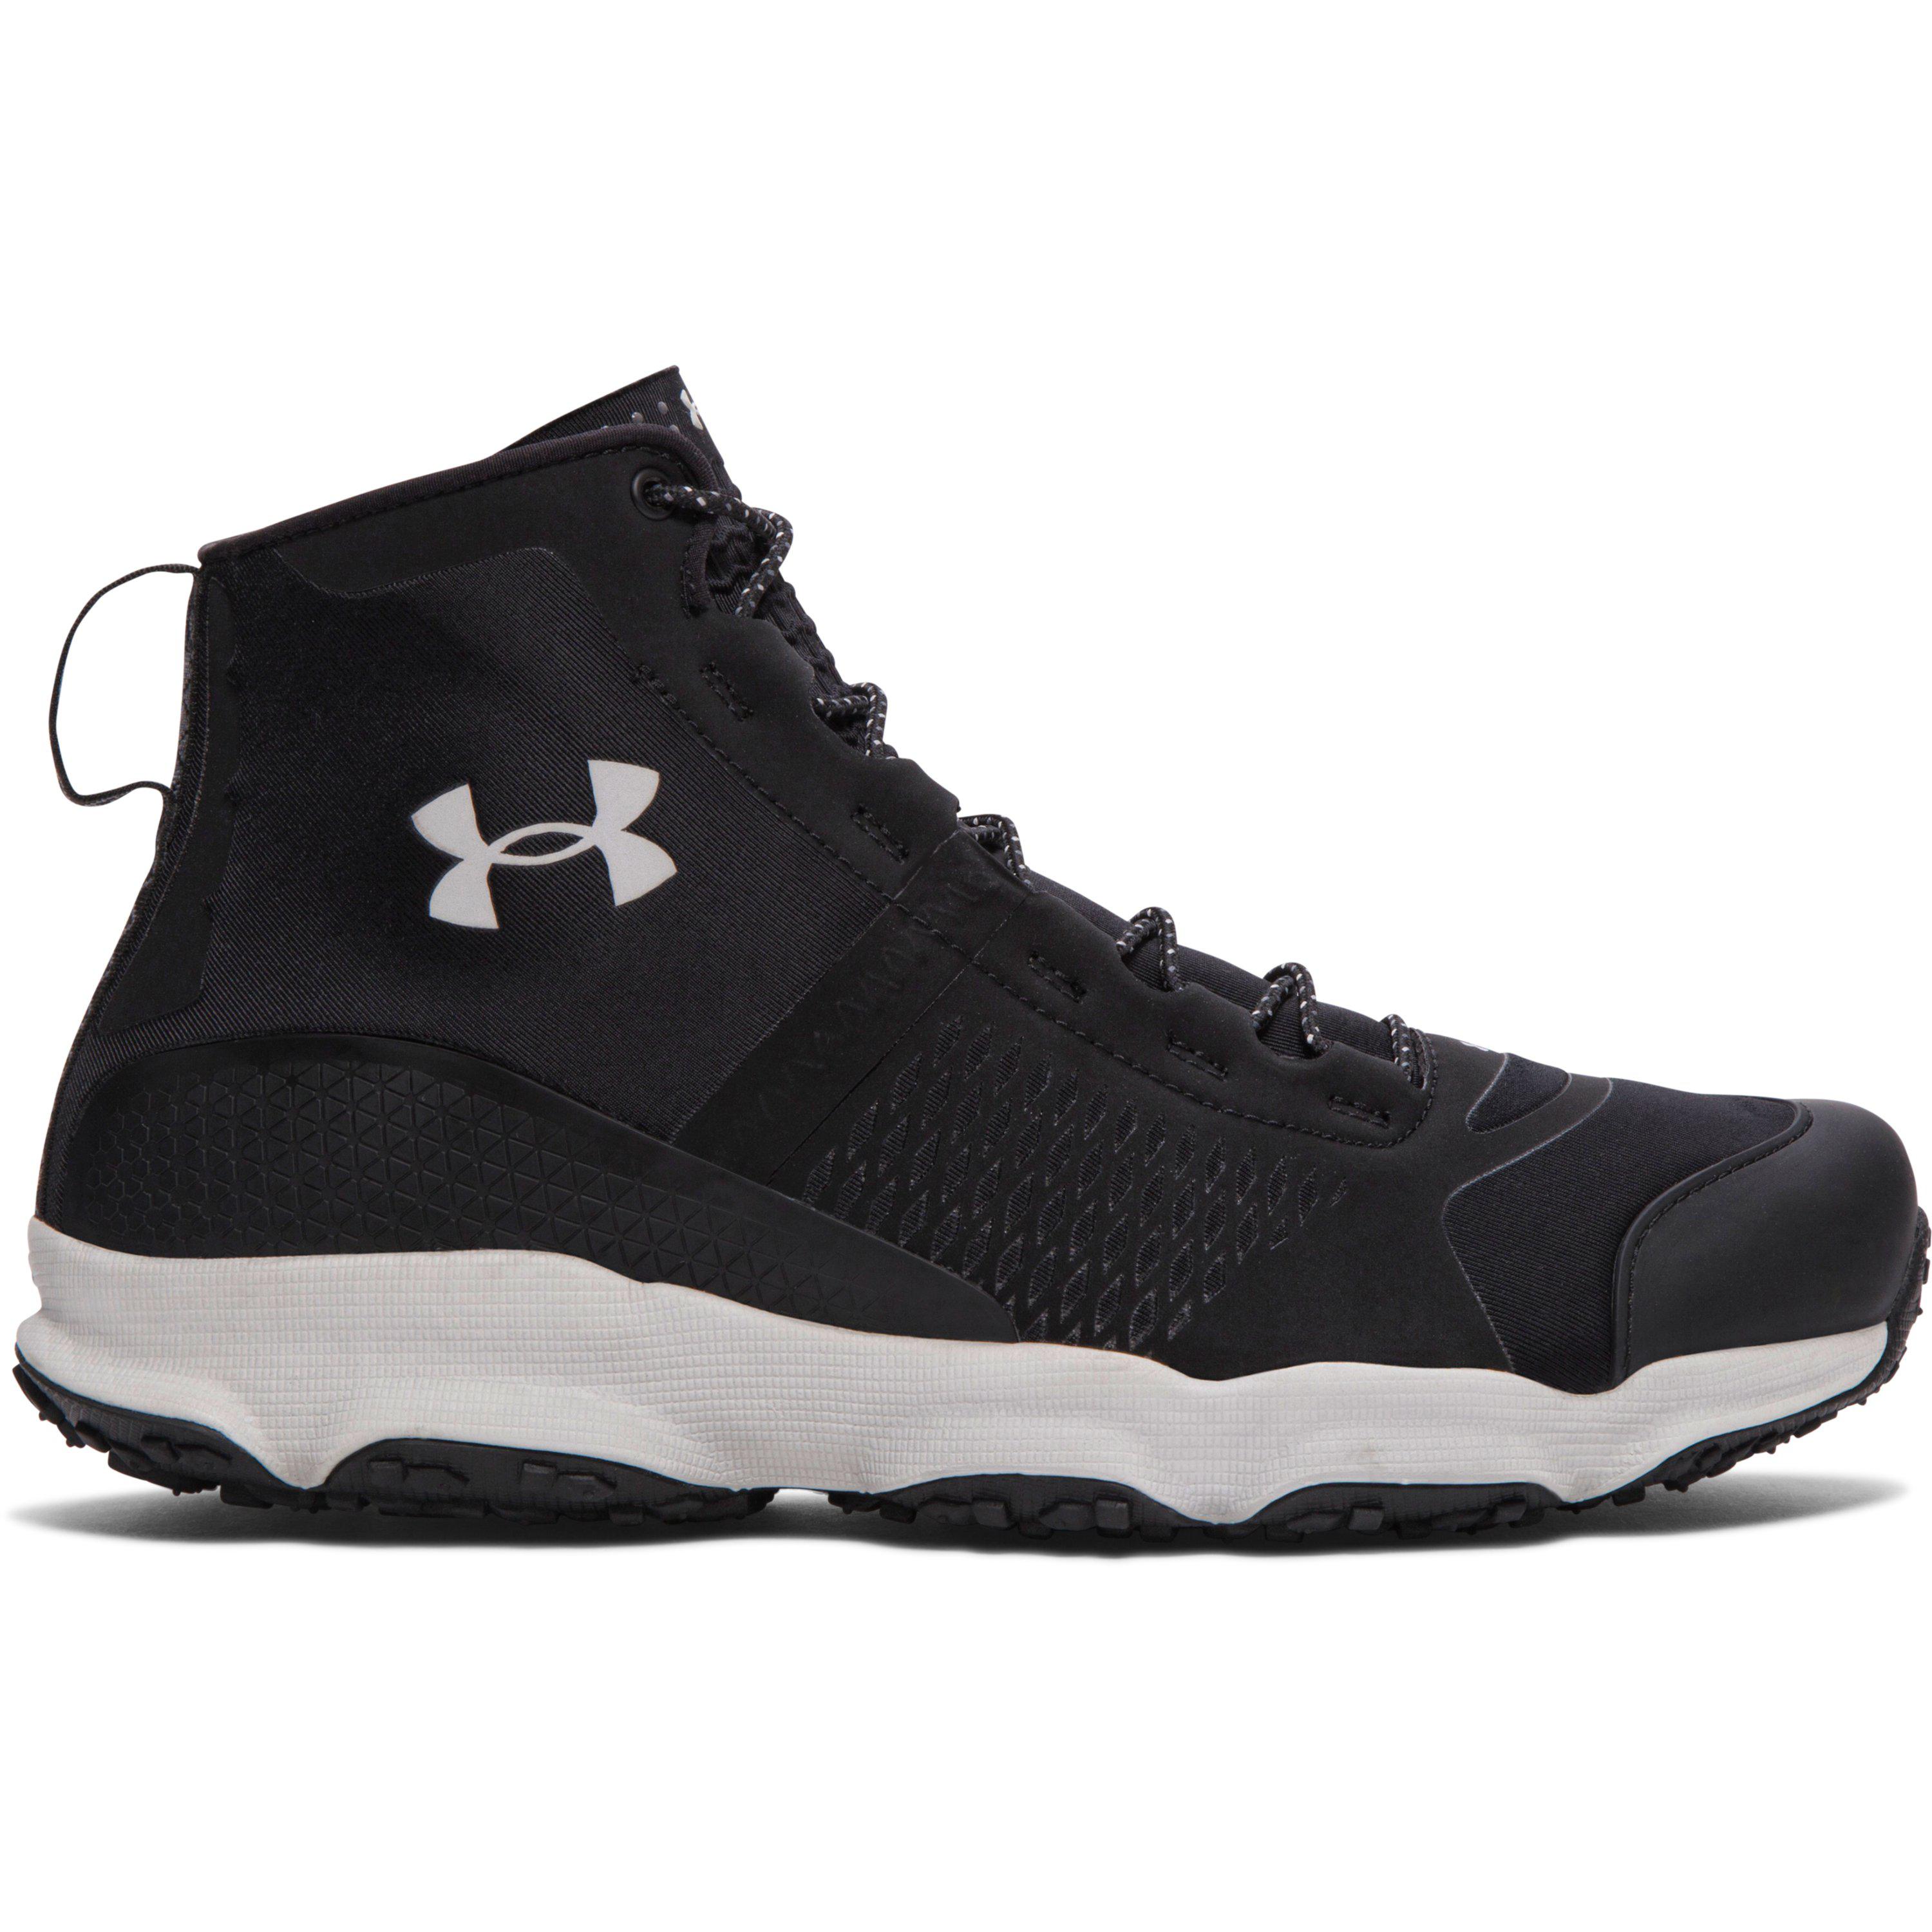 Under Armour Suede Men's Ua Speed Freek Bozeman Hunting Boots – Wide ...